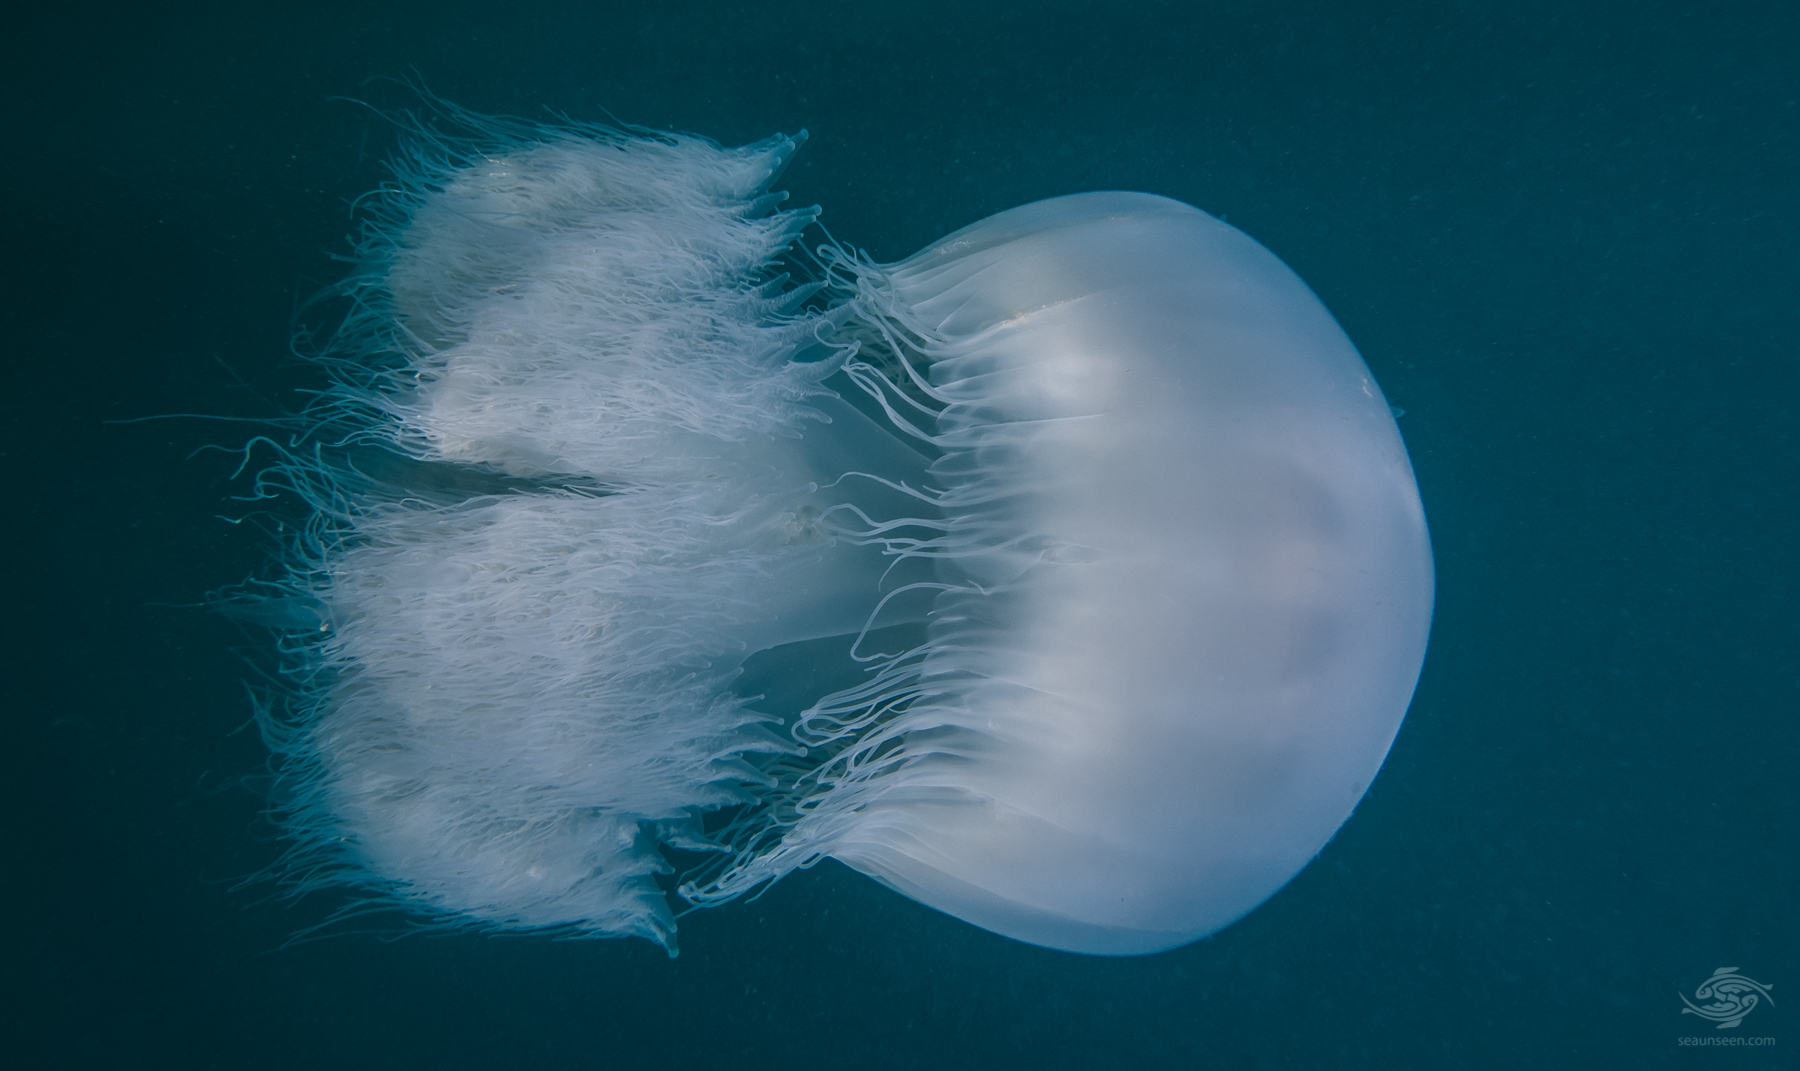 Nomad Jellyfish Facts and Photographs - Seaunseen